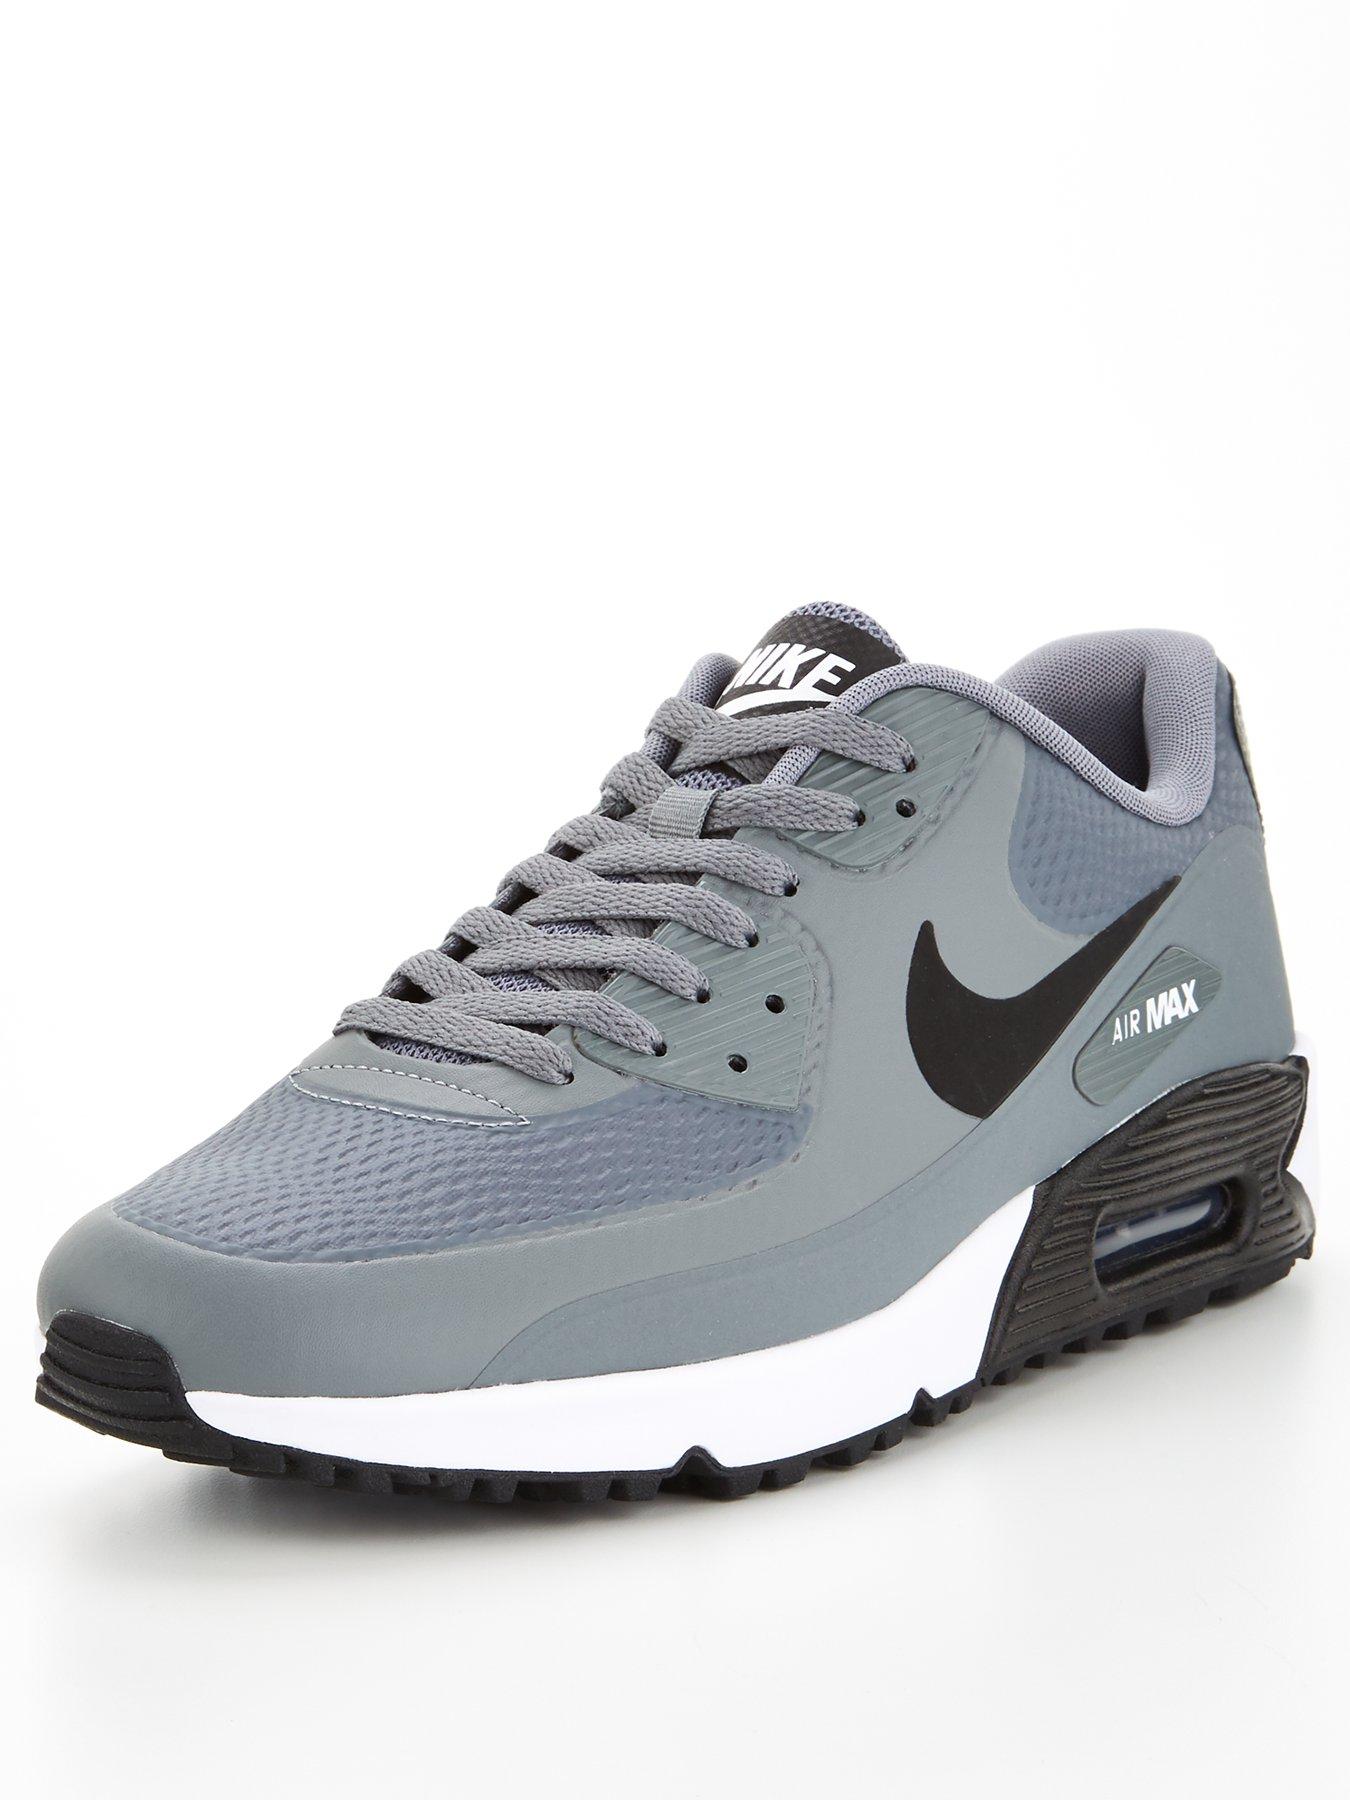 new nike air max mens trainers